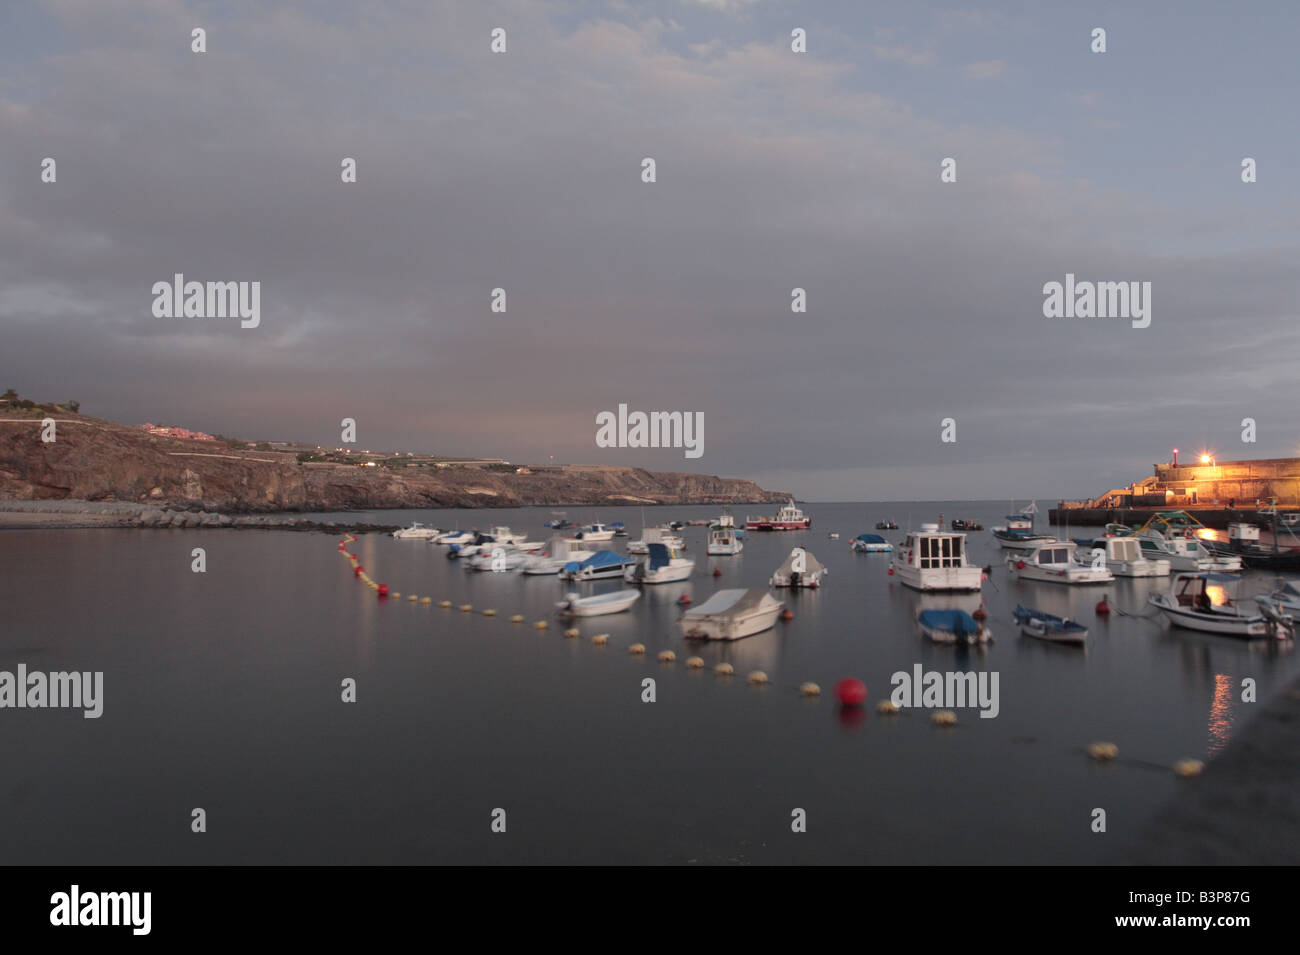 Harbour and boats at dusk with a long exposure in Playa San Juan Tenerife Canary Islands Spain Stock Photo